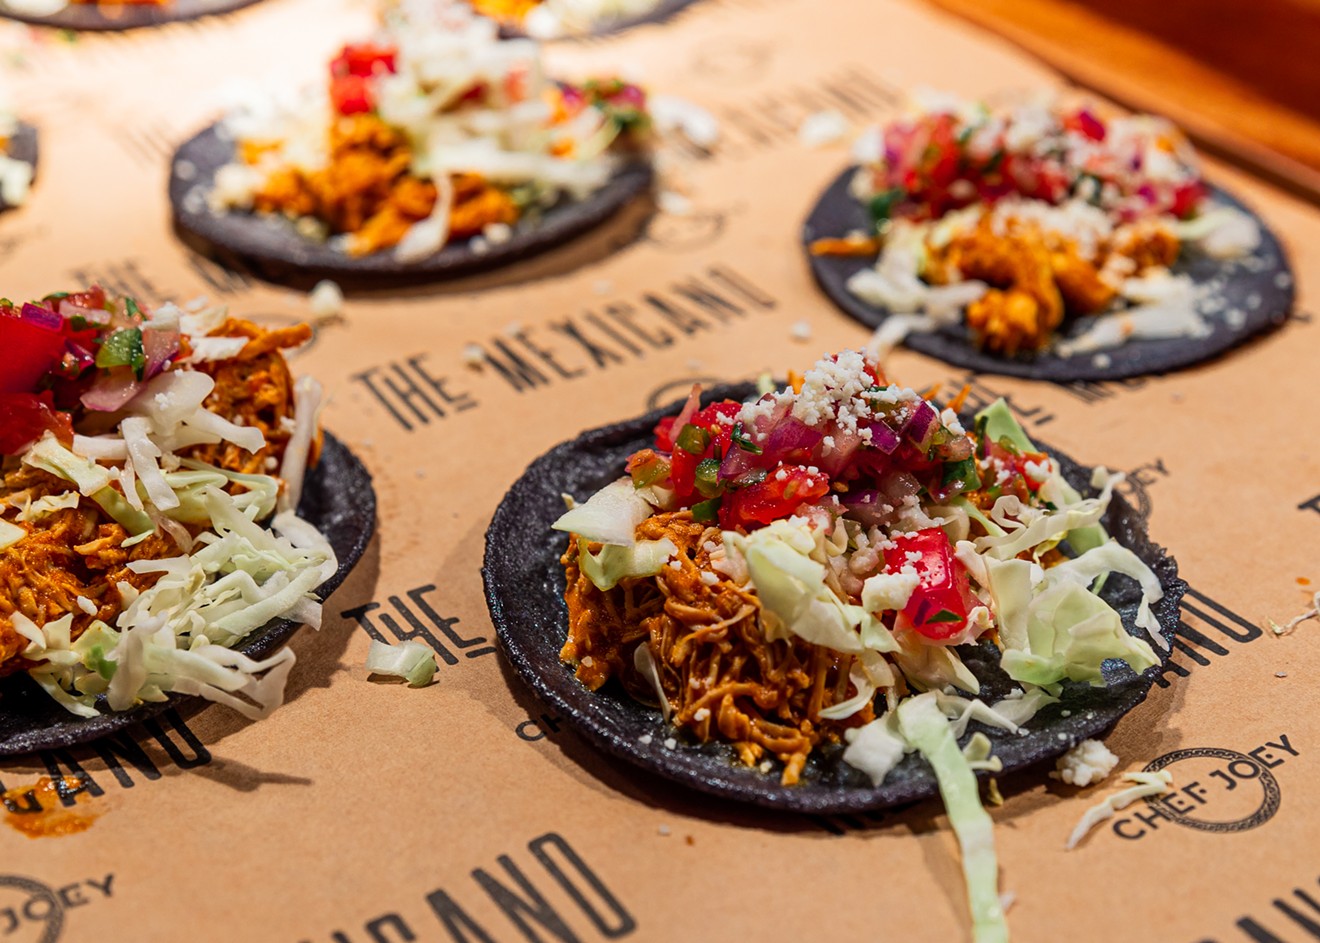 The Chicken Tinga Tacos are served on blue corn tortillas.